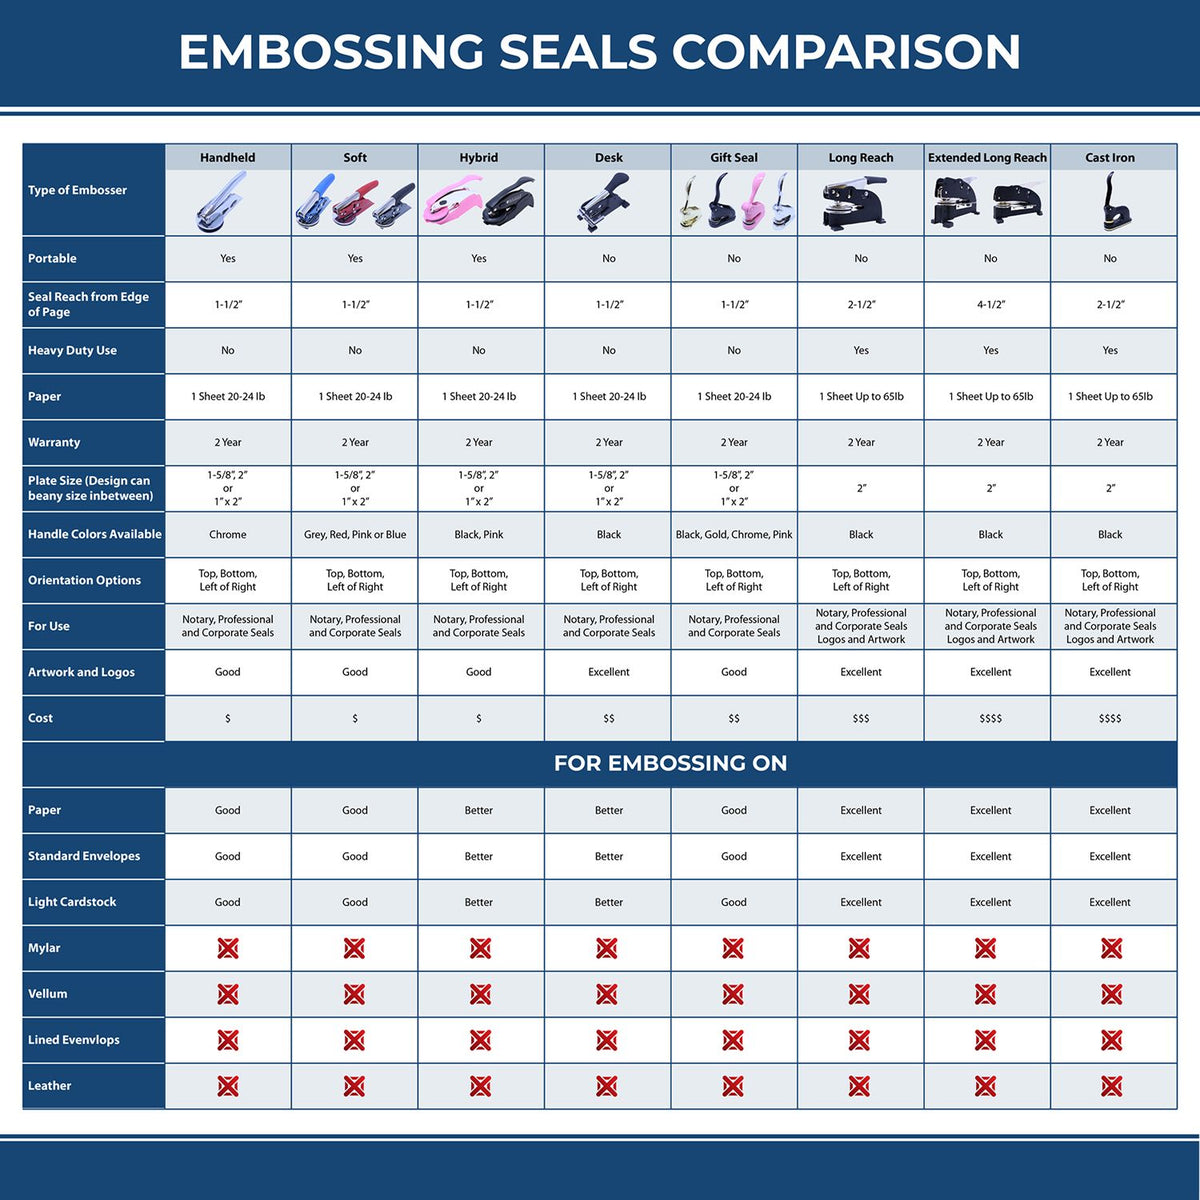 A comparison chart for the different types of mount models available for the State of Wyoming Long Reach Architectural Embossing Seal.